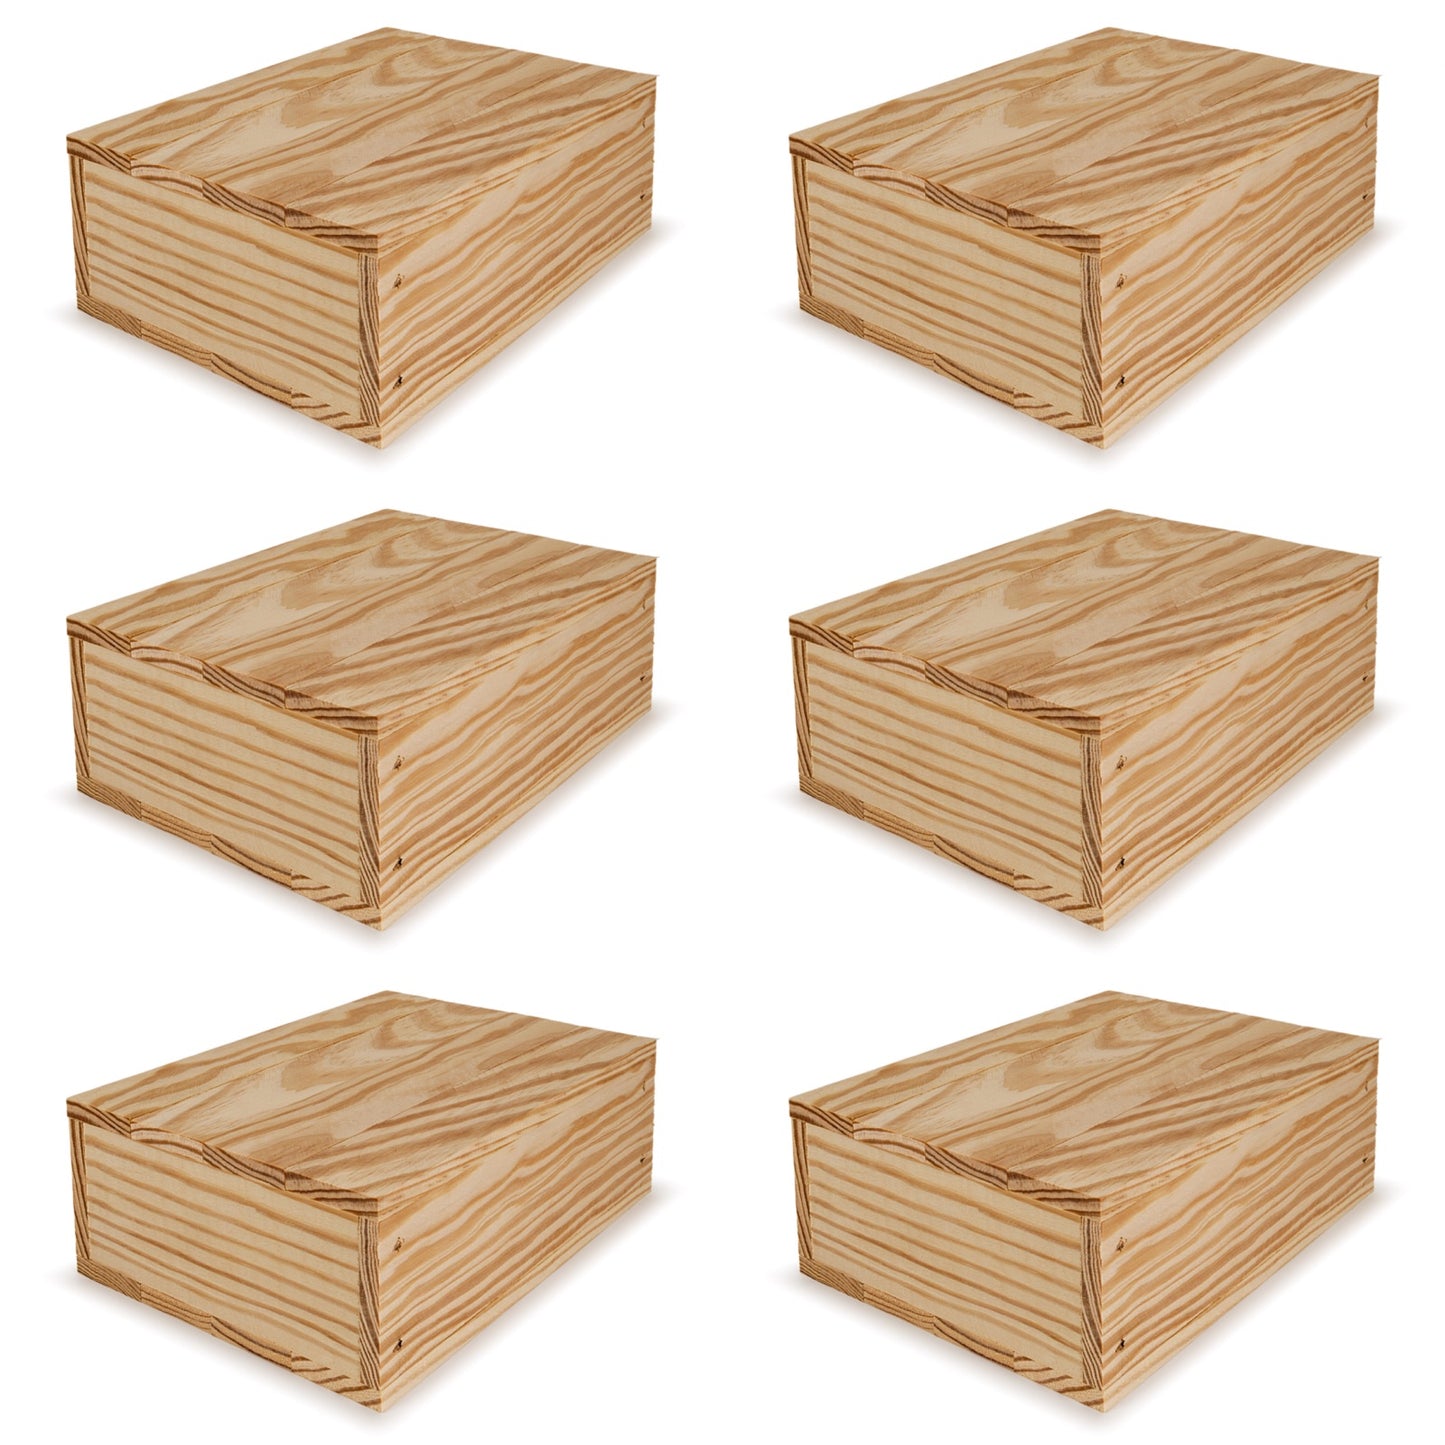 6 Small wooden crates with lid 8x6.25x2.75